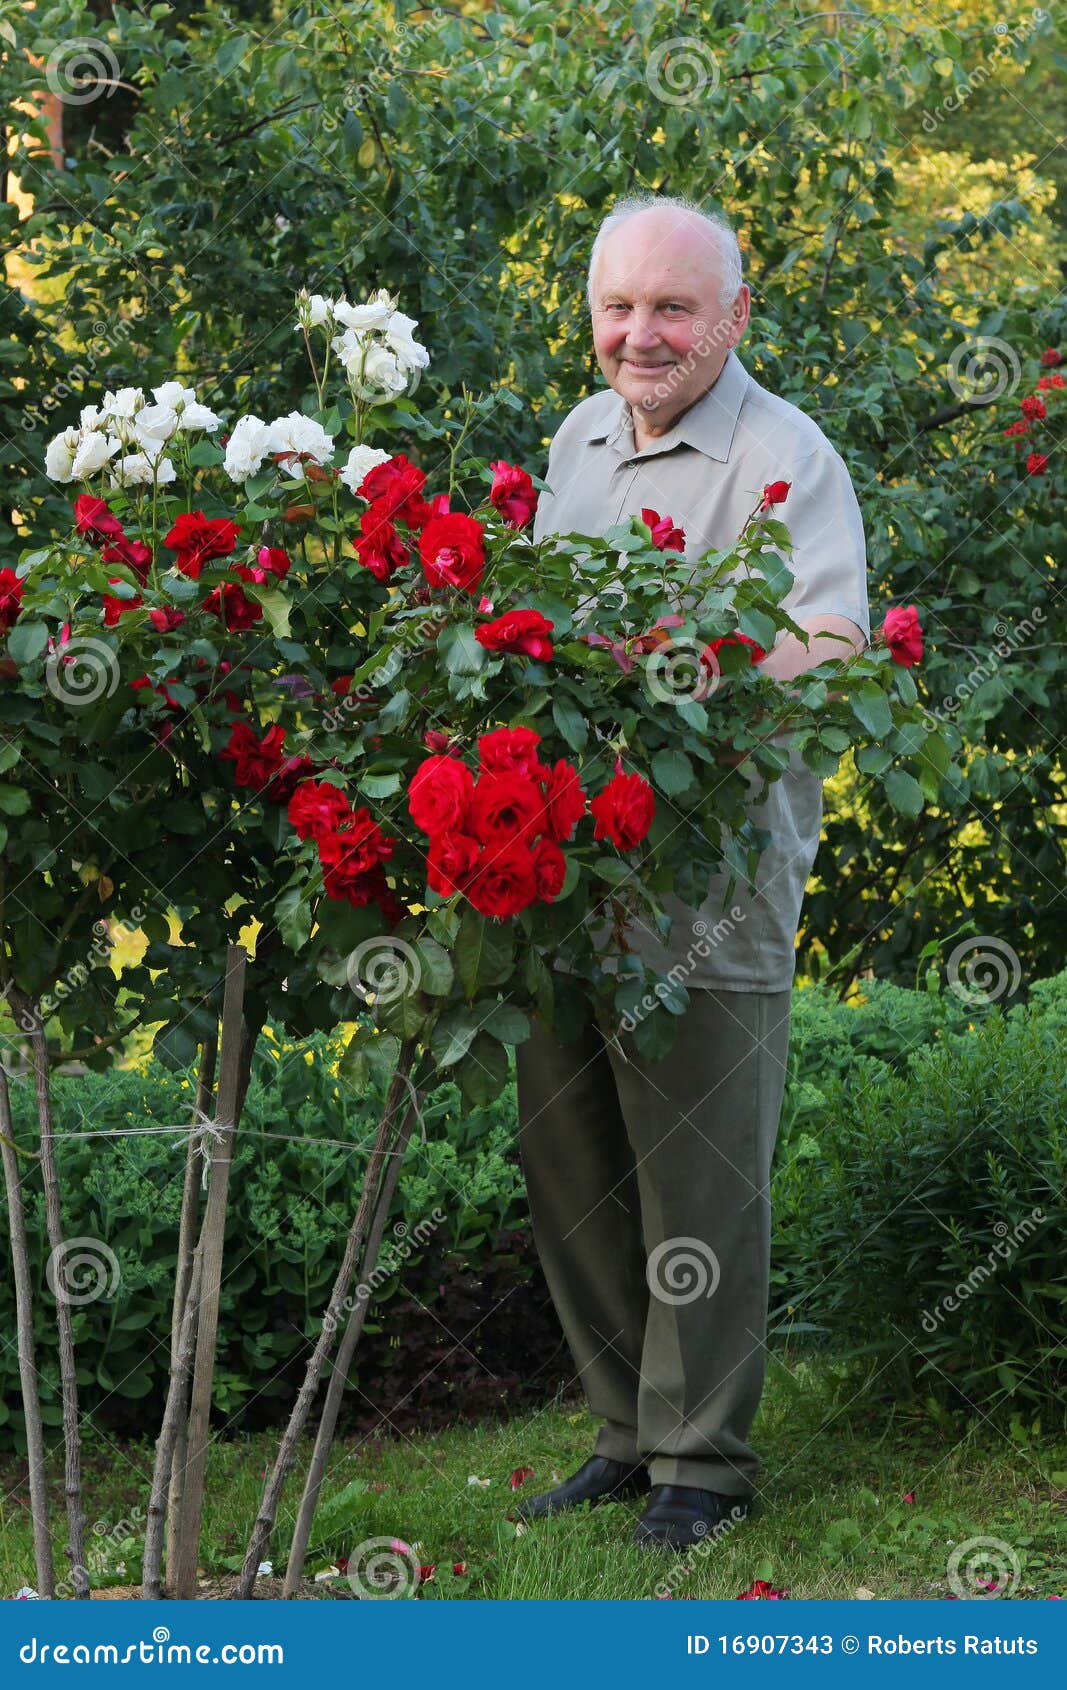 grower of roses